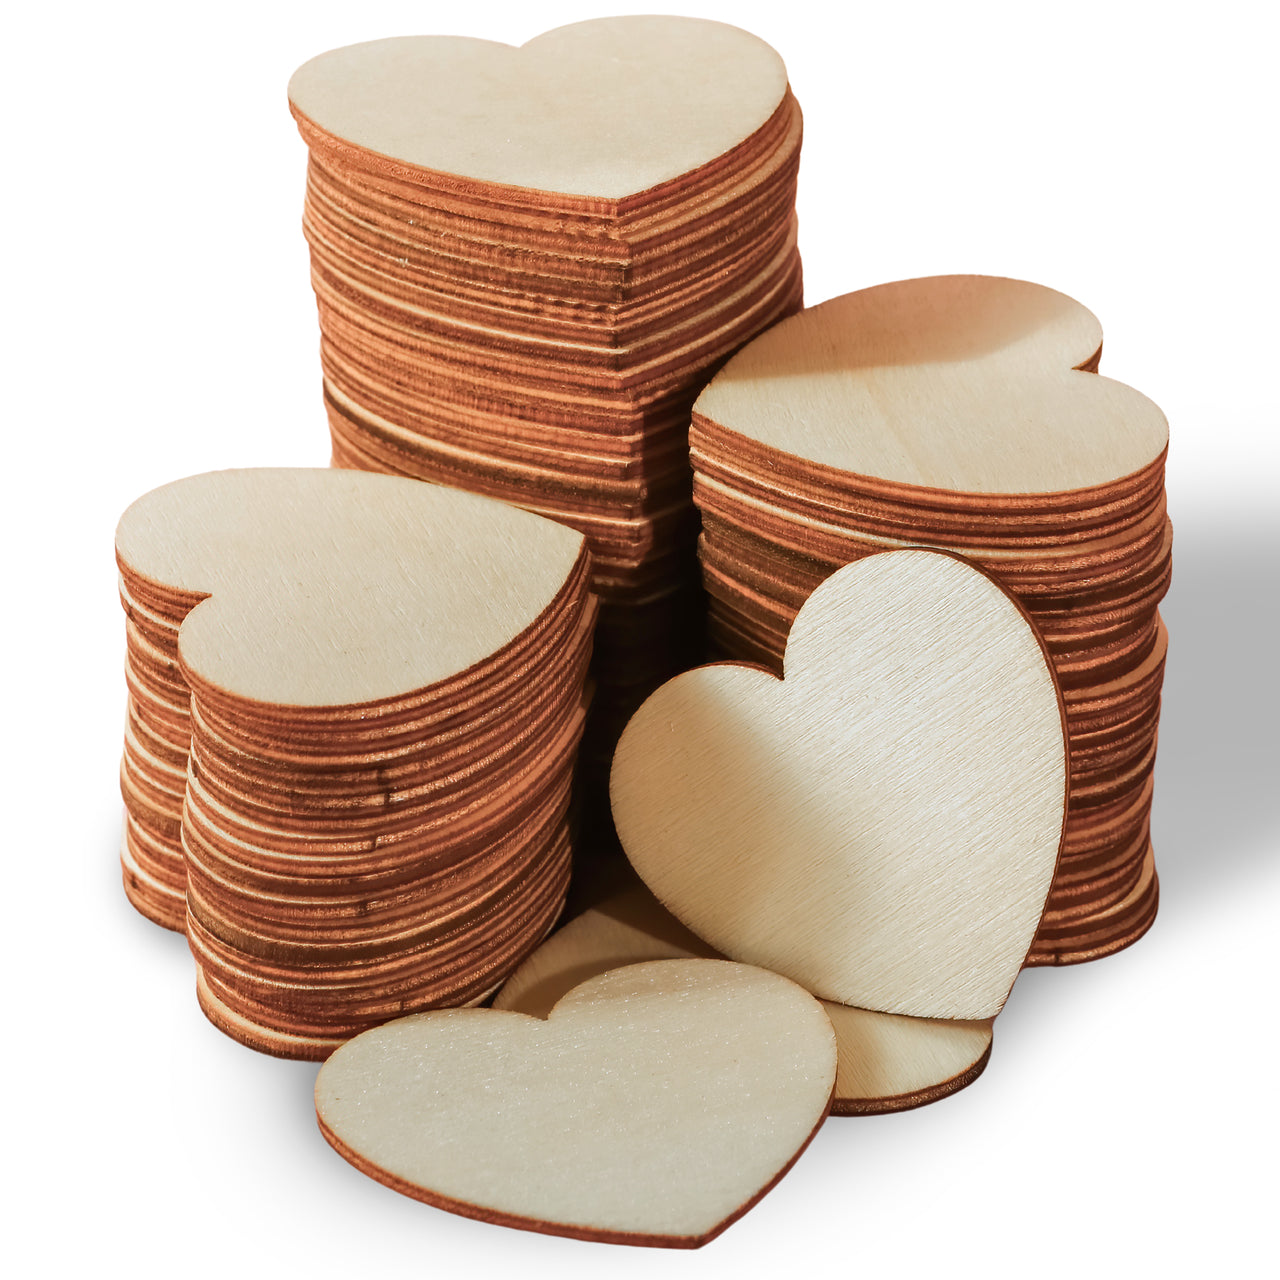 Wooden Hearts for Guest Book Alternative (Set of 75)